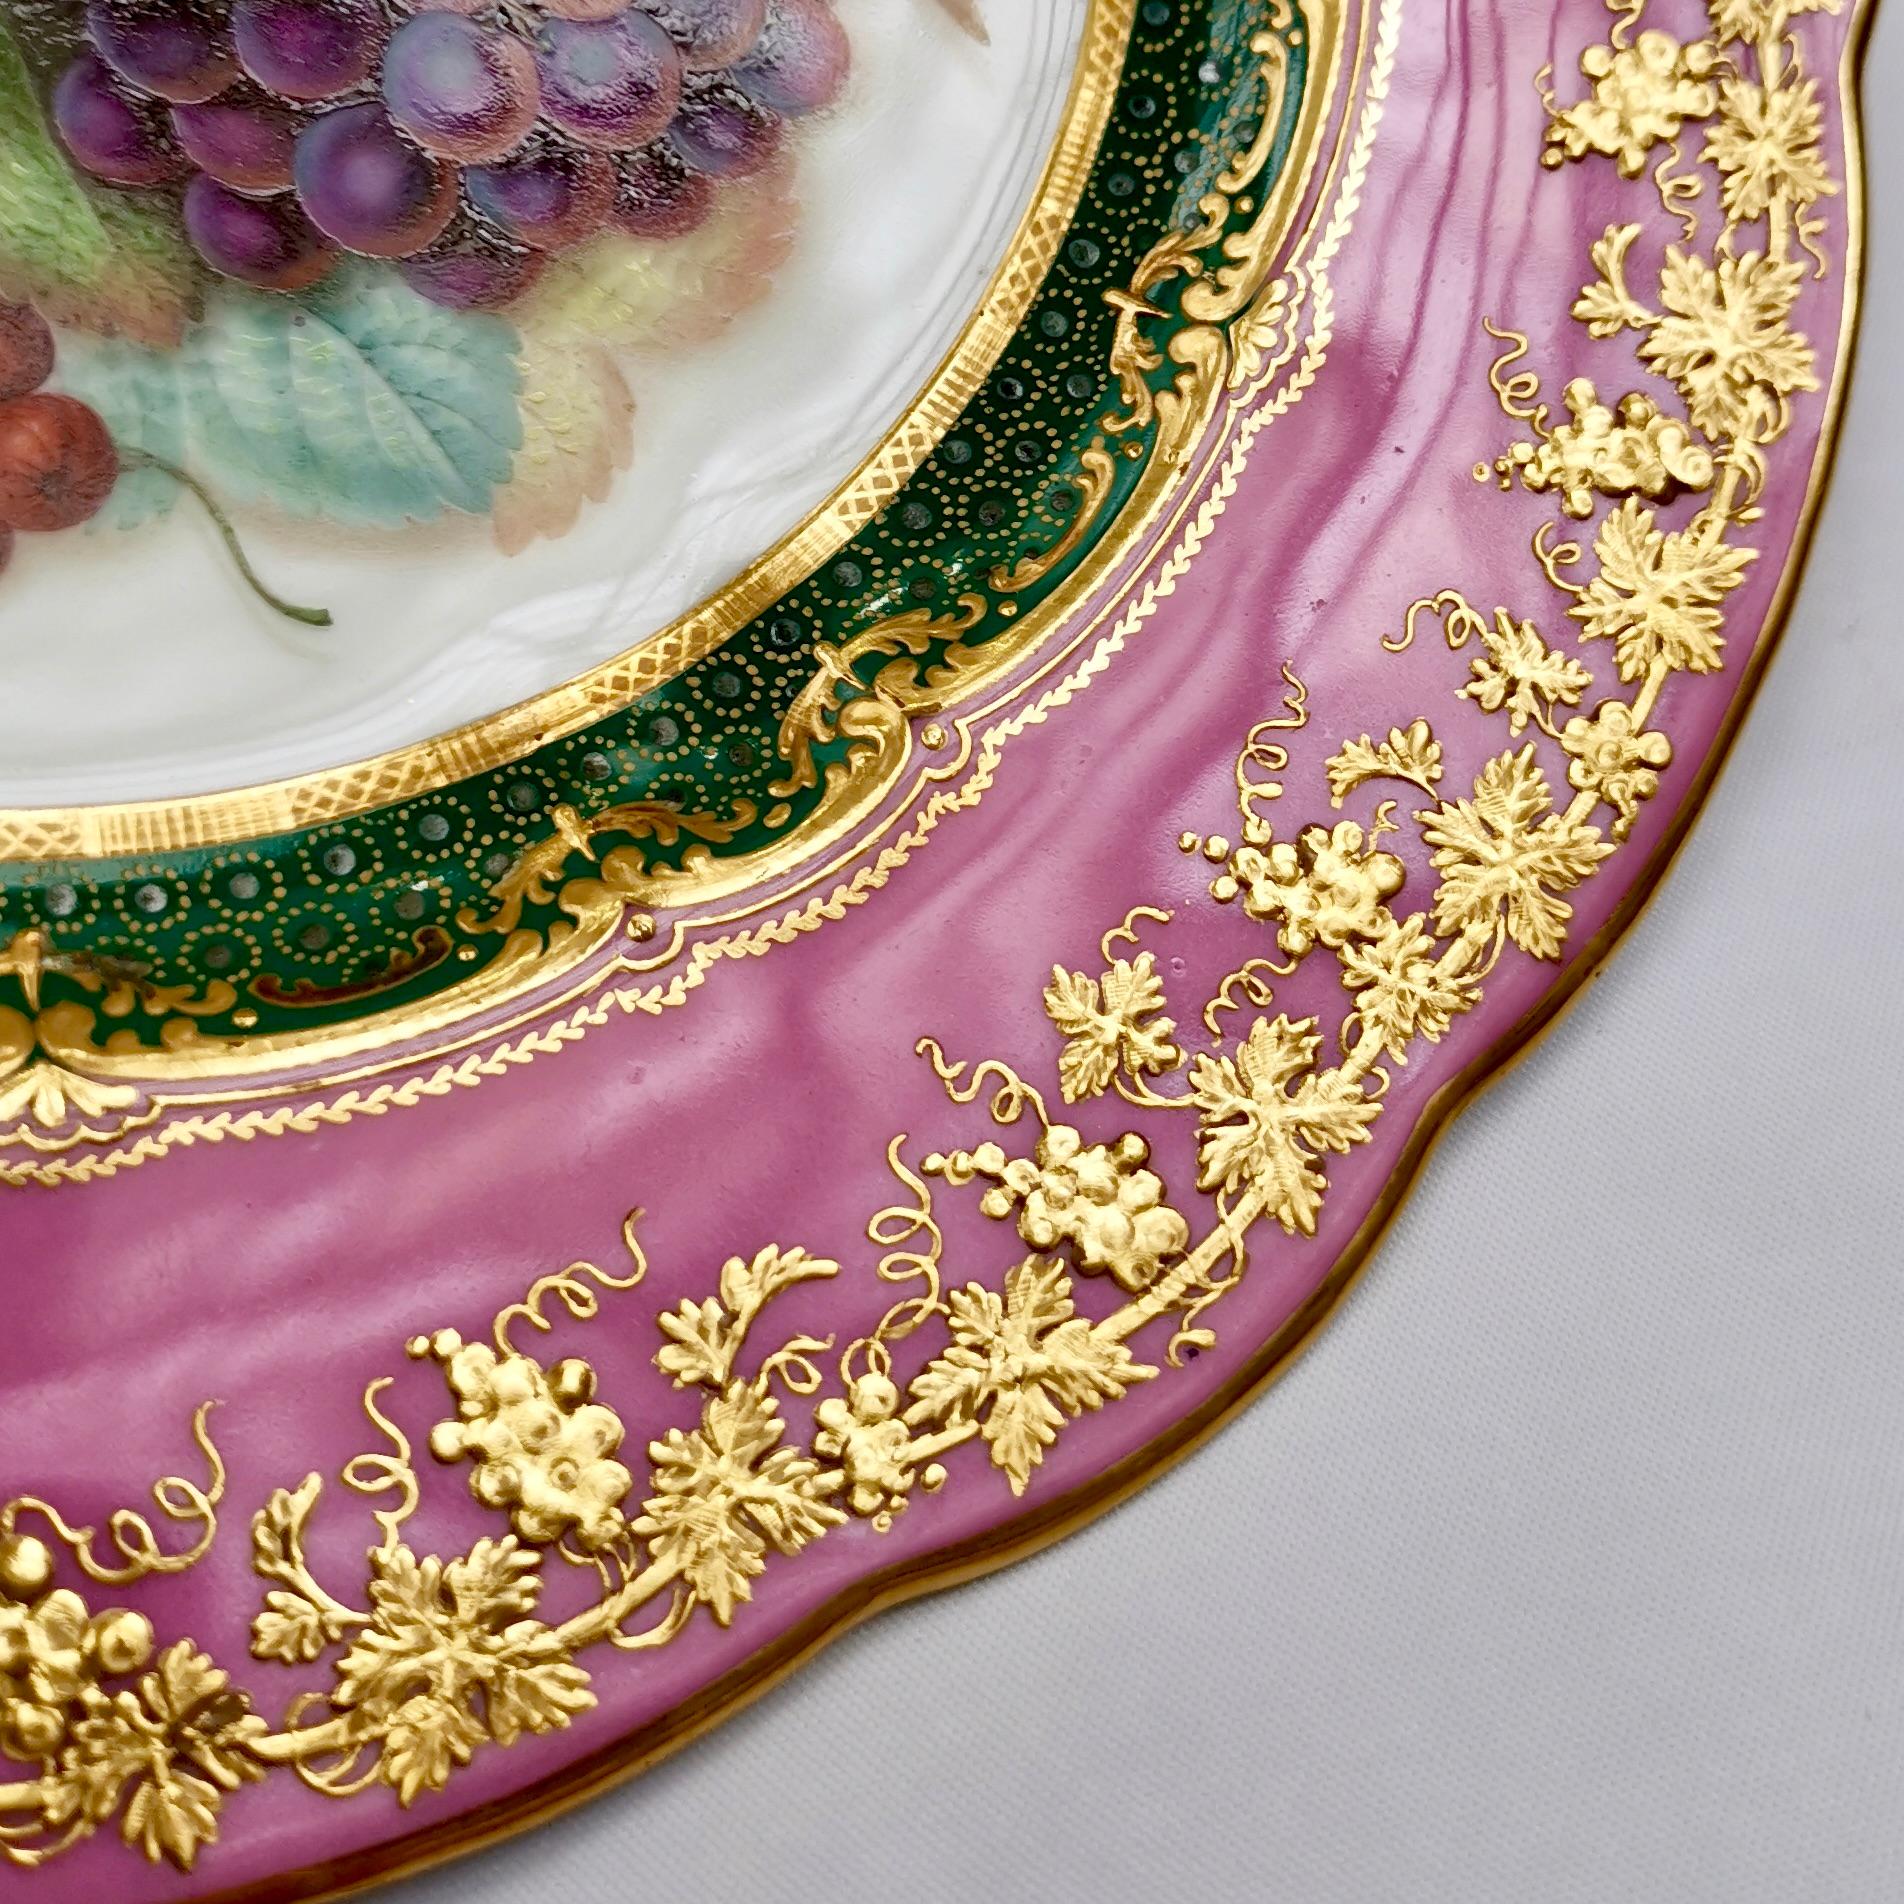 Late 19th Century Coalport Porcelain Plate, Rose du Barry Pink, Fruits by Jabey Aston, circa 1870